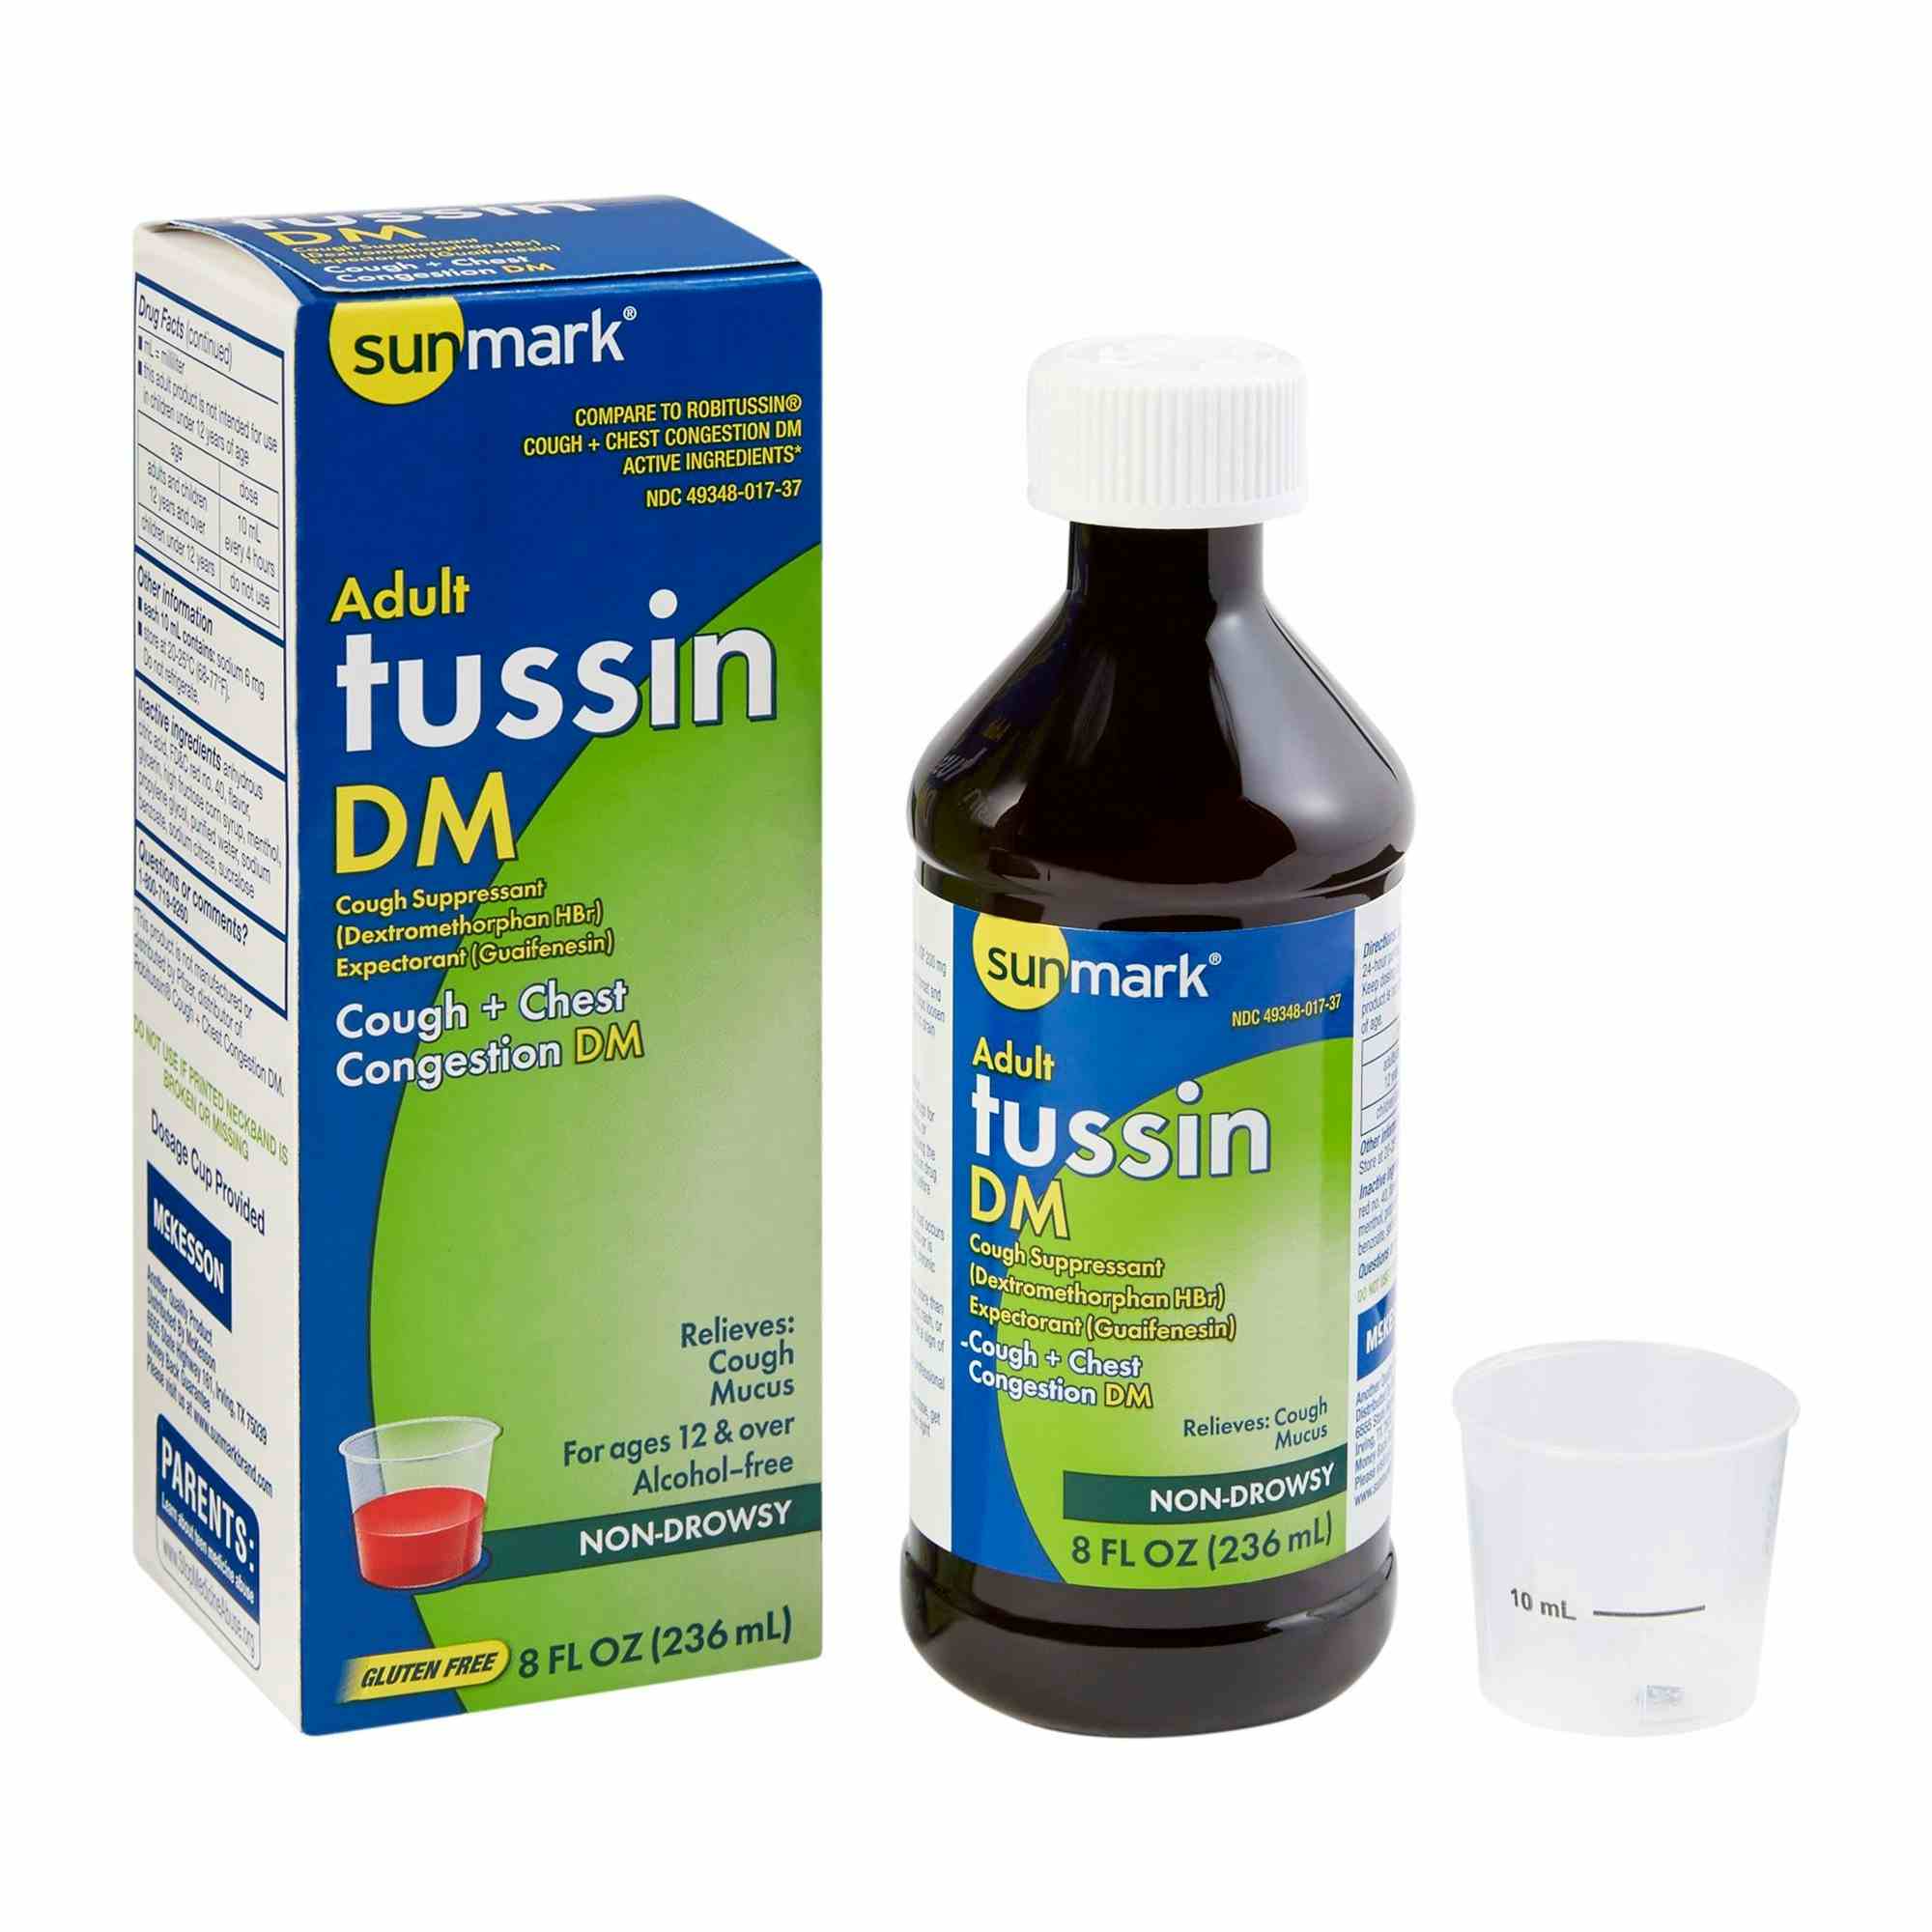 Sunmark Adult Tussin DM Cough + Chest Congestion Suppressant, 100 mg